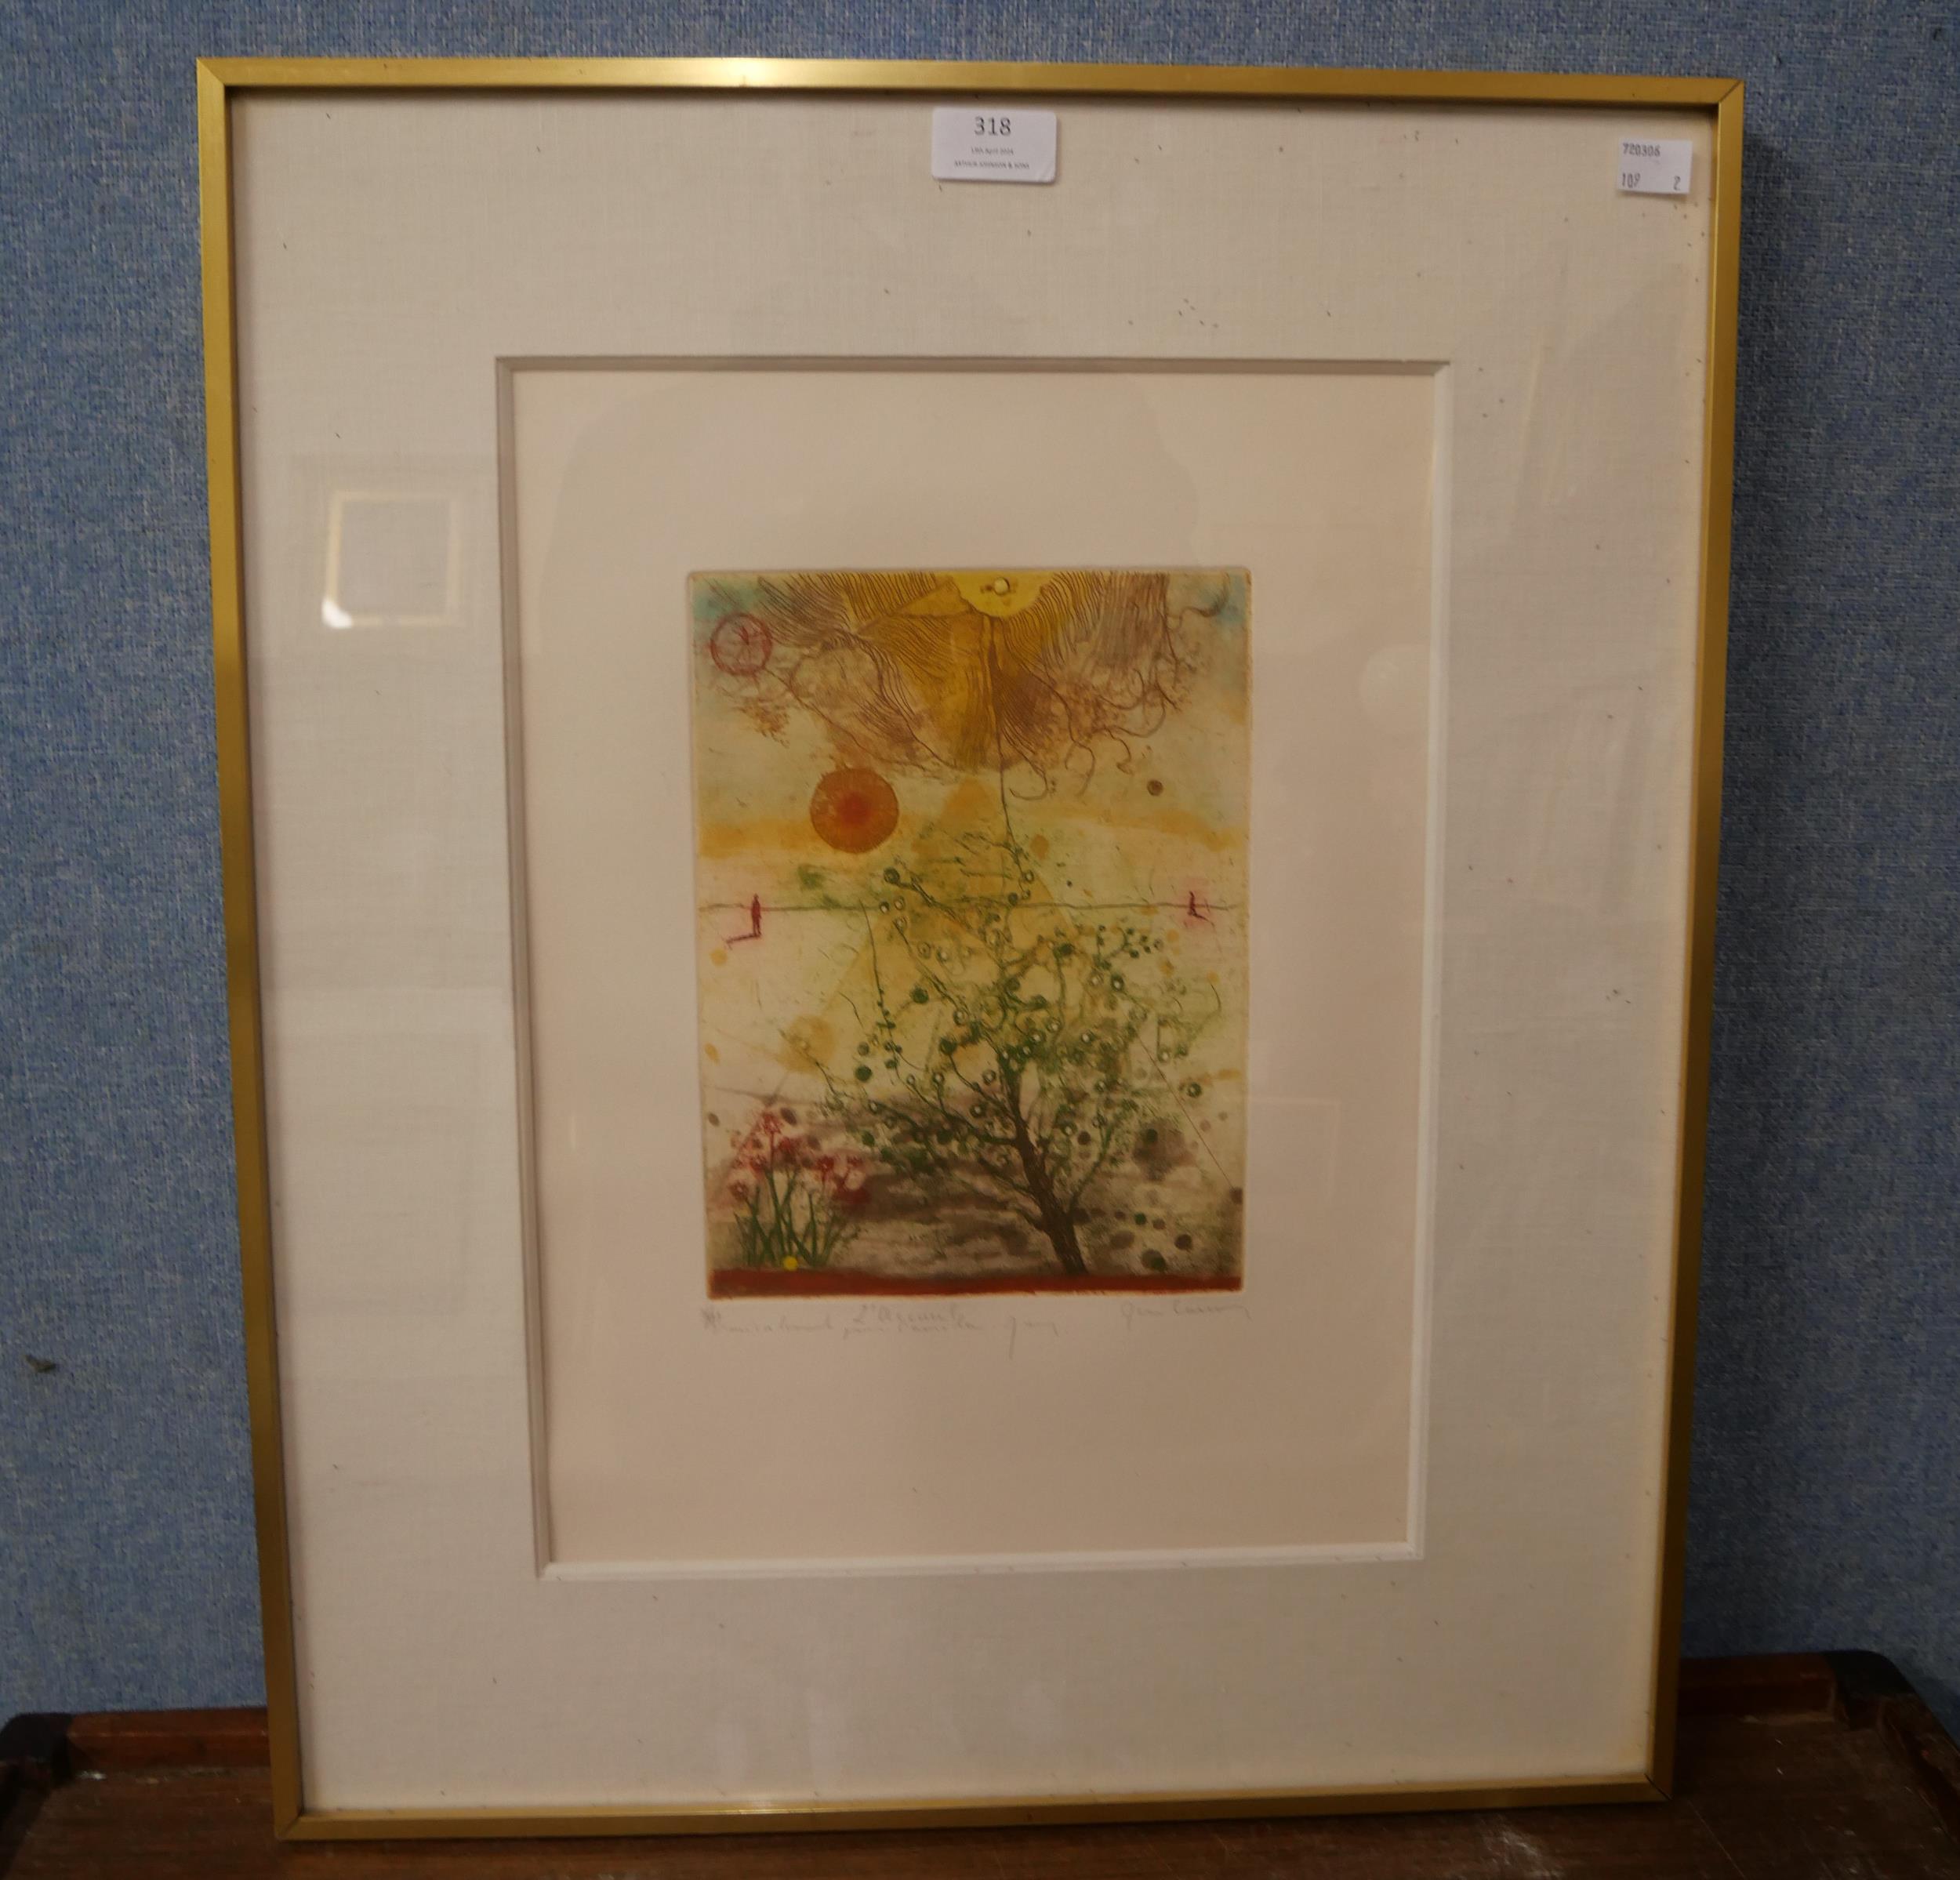 Rene Carcan, two engraved etchings, framed - Image 2 of 2